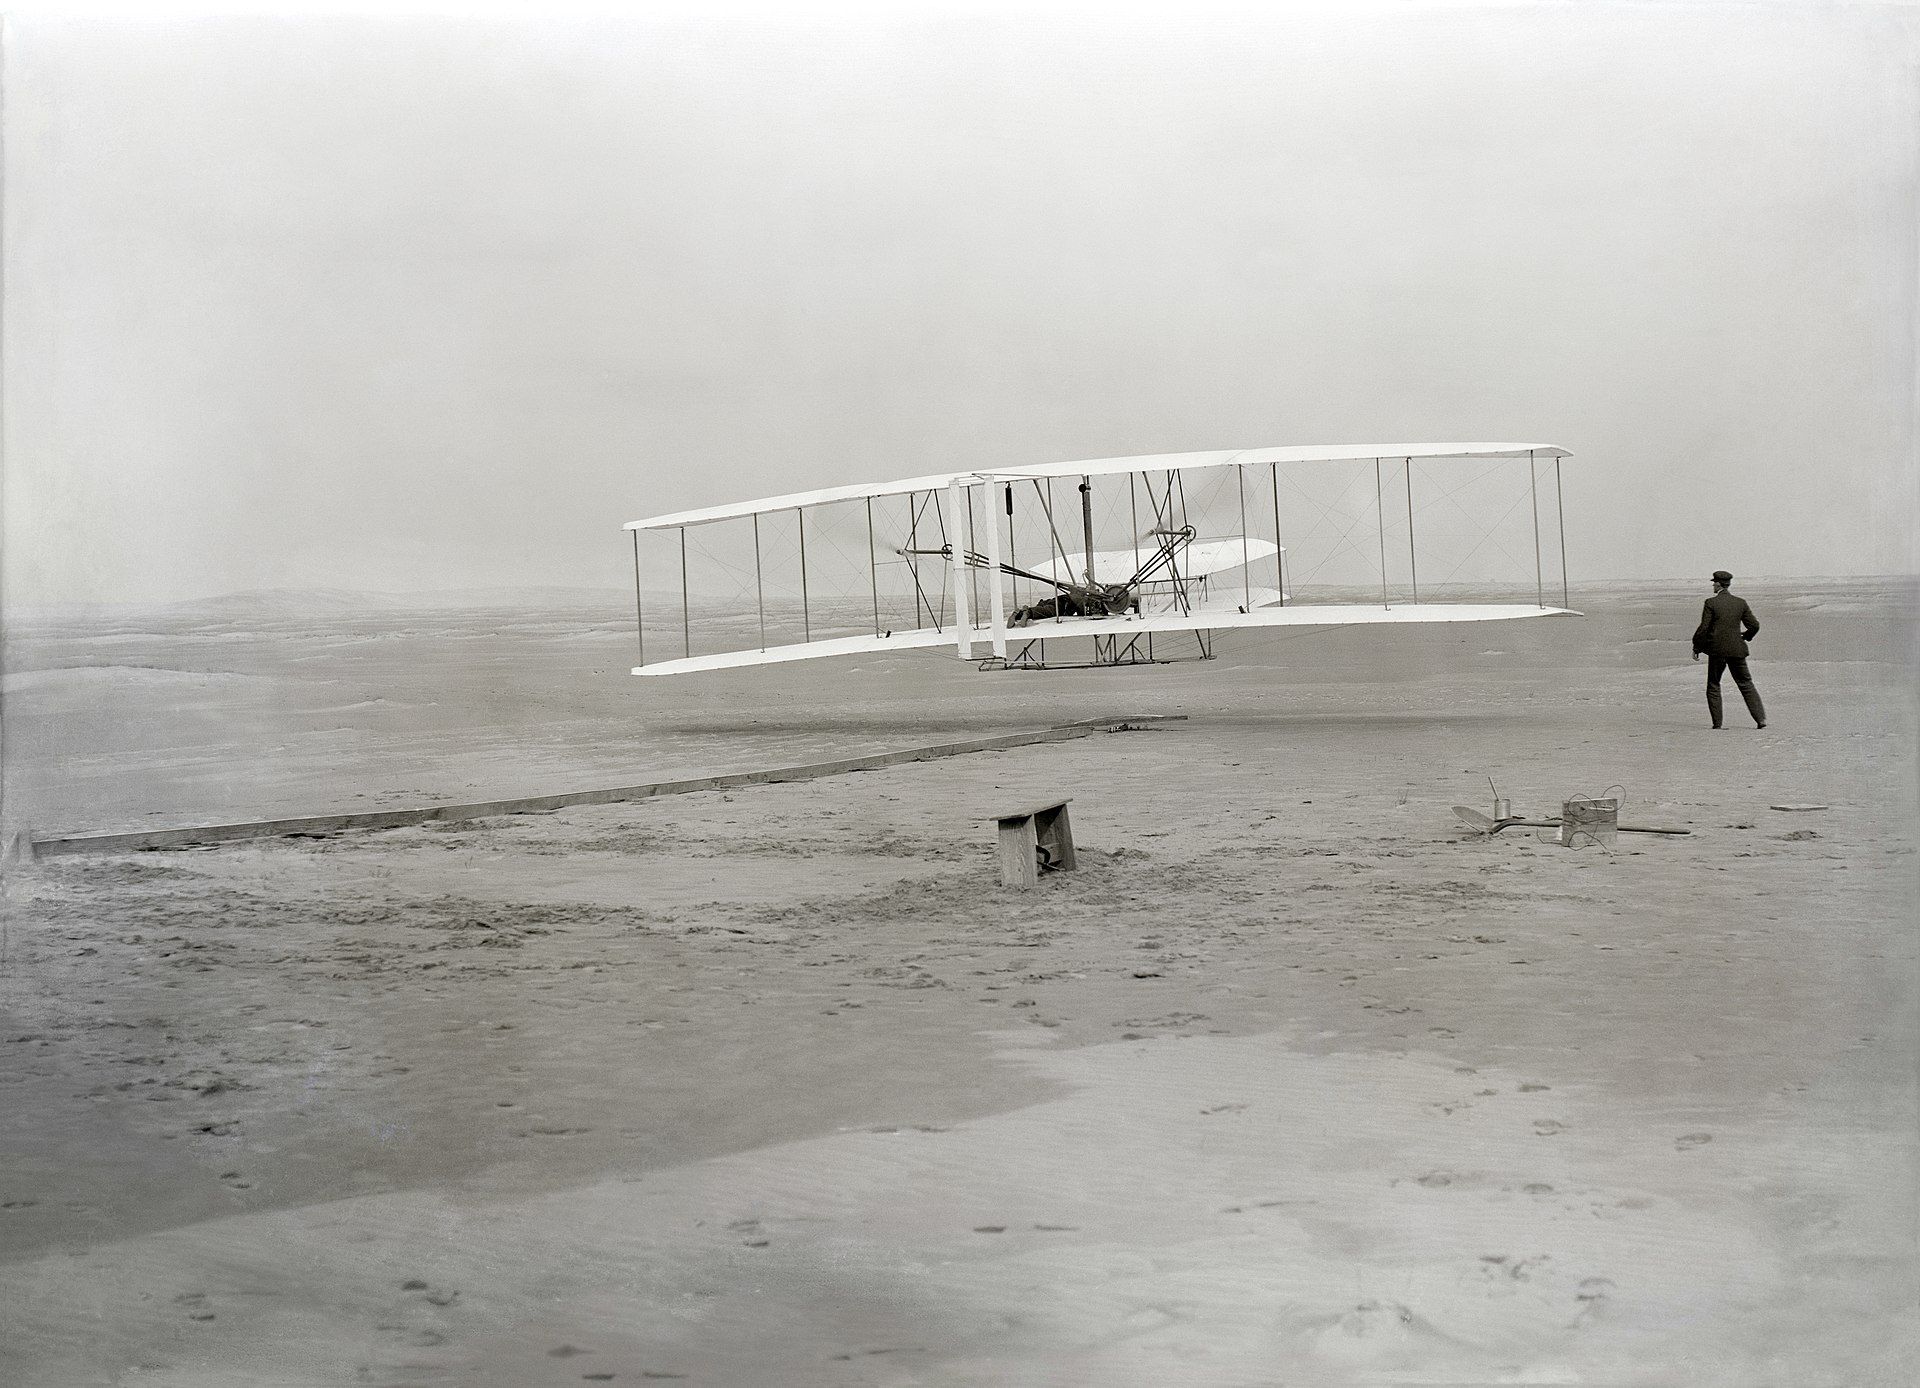 The Wright Flyer.